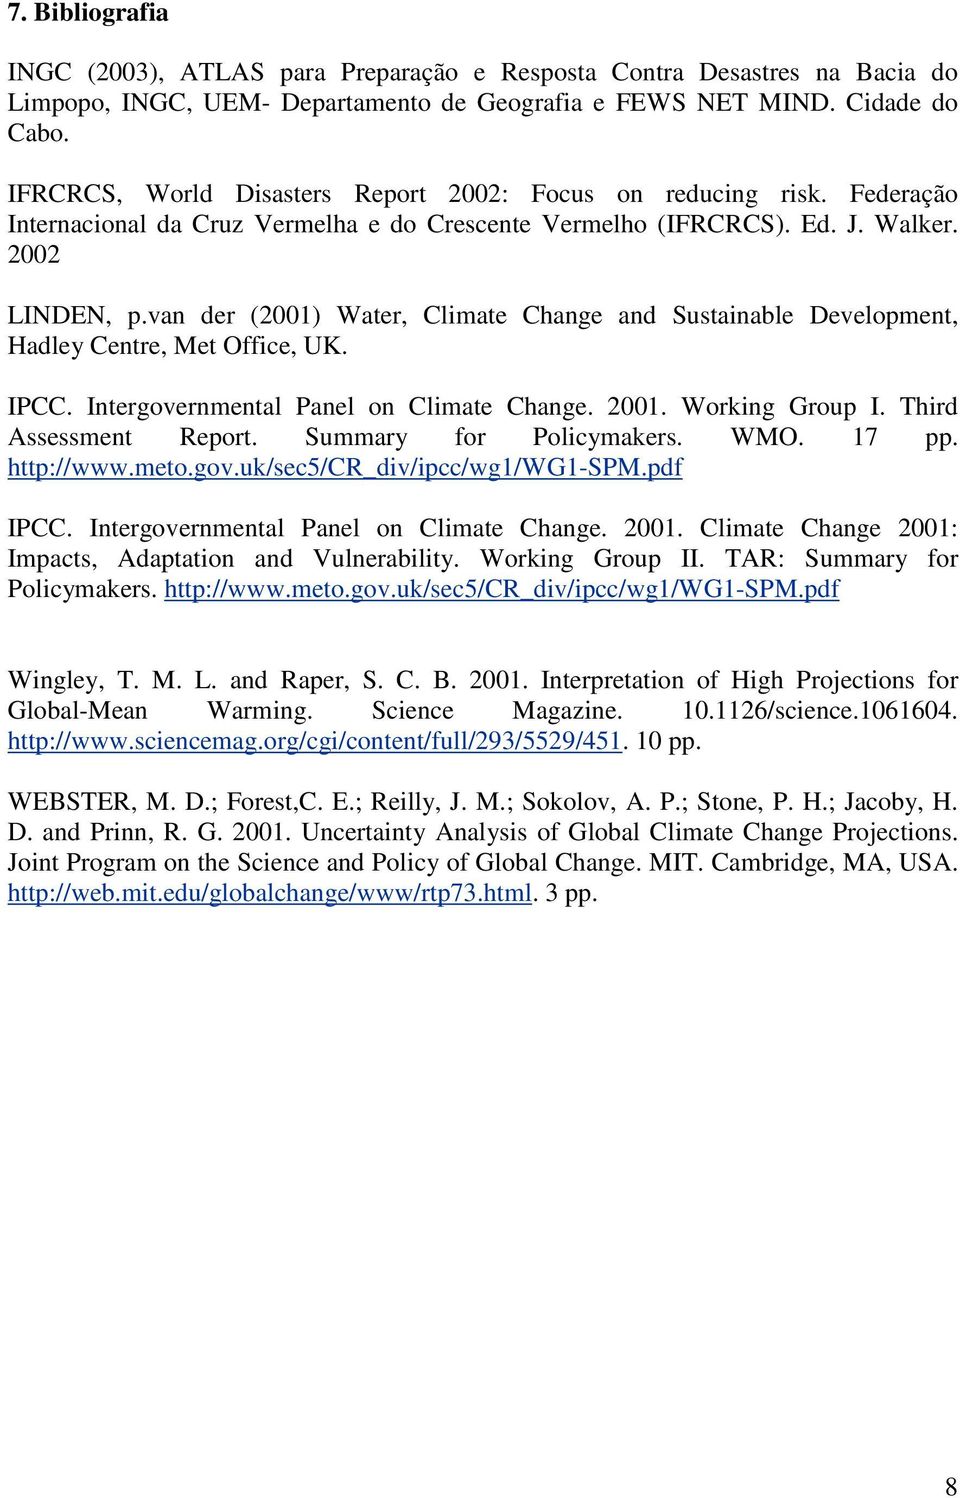 van der (2001) Water, Climate Change and Sustainable Development, Hadley Centre, Met Office, UK. IPCC. Intergovernmental Panel on Climate Change. 2001. Working Group I. Third Assessment Report.